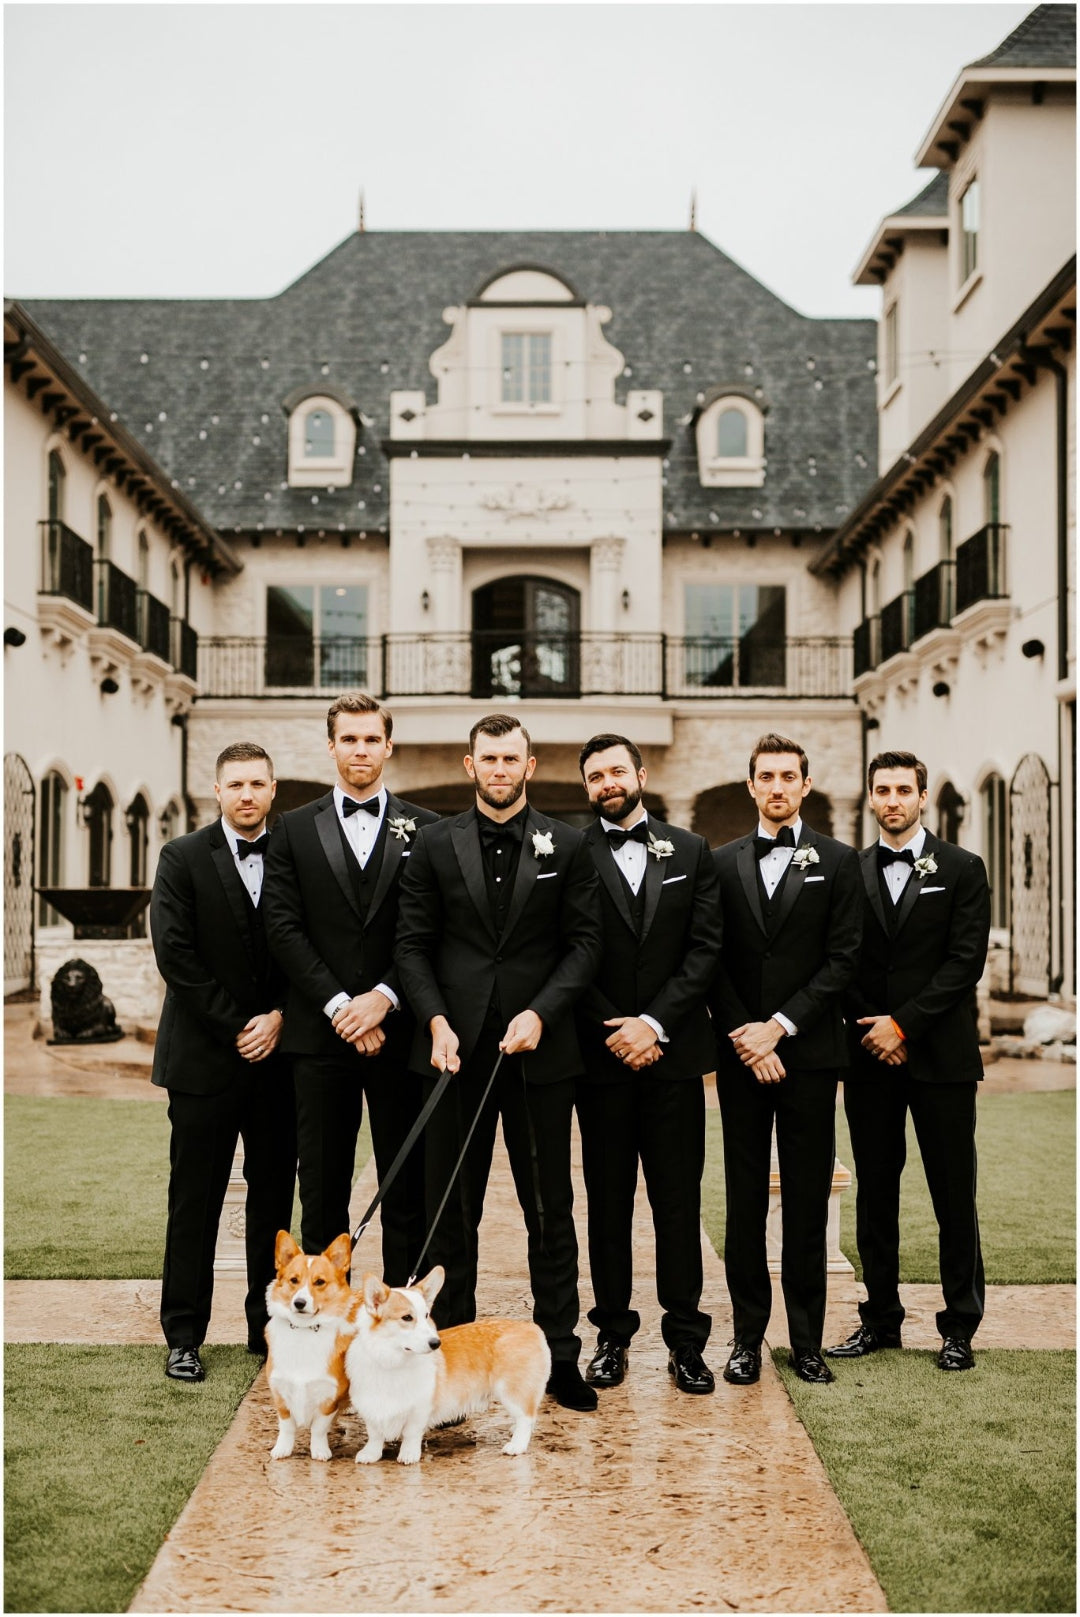 Groom and groomsmen wearing black tuxedos posing with two dogs.